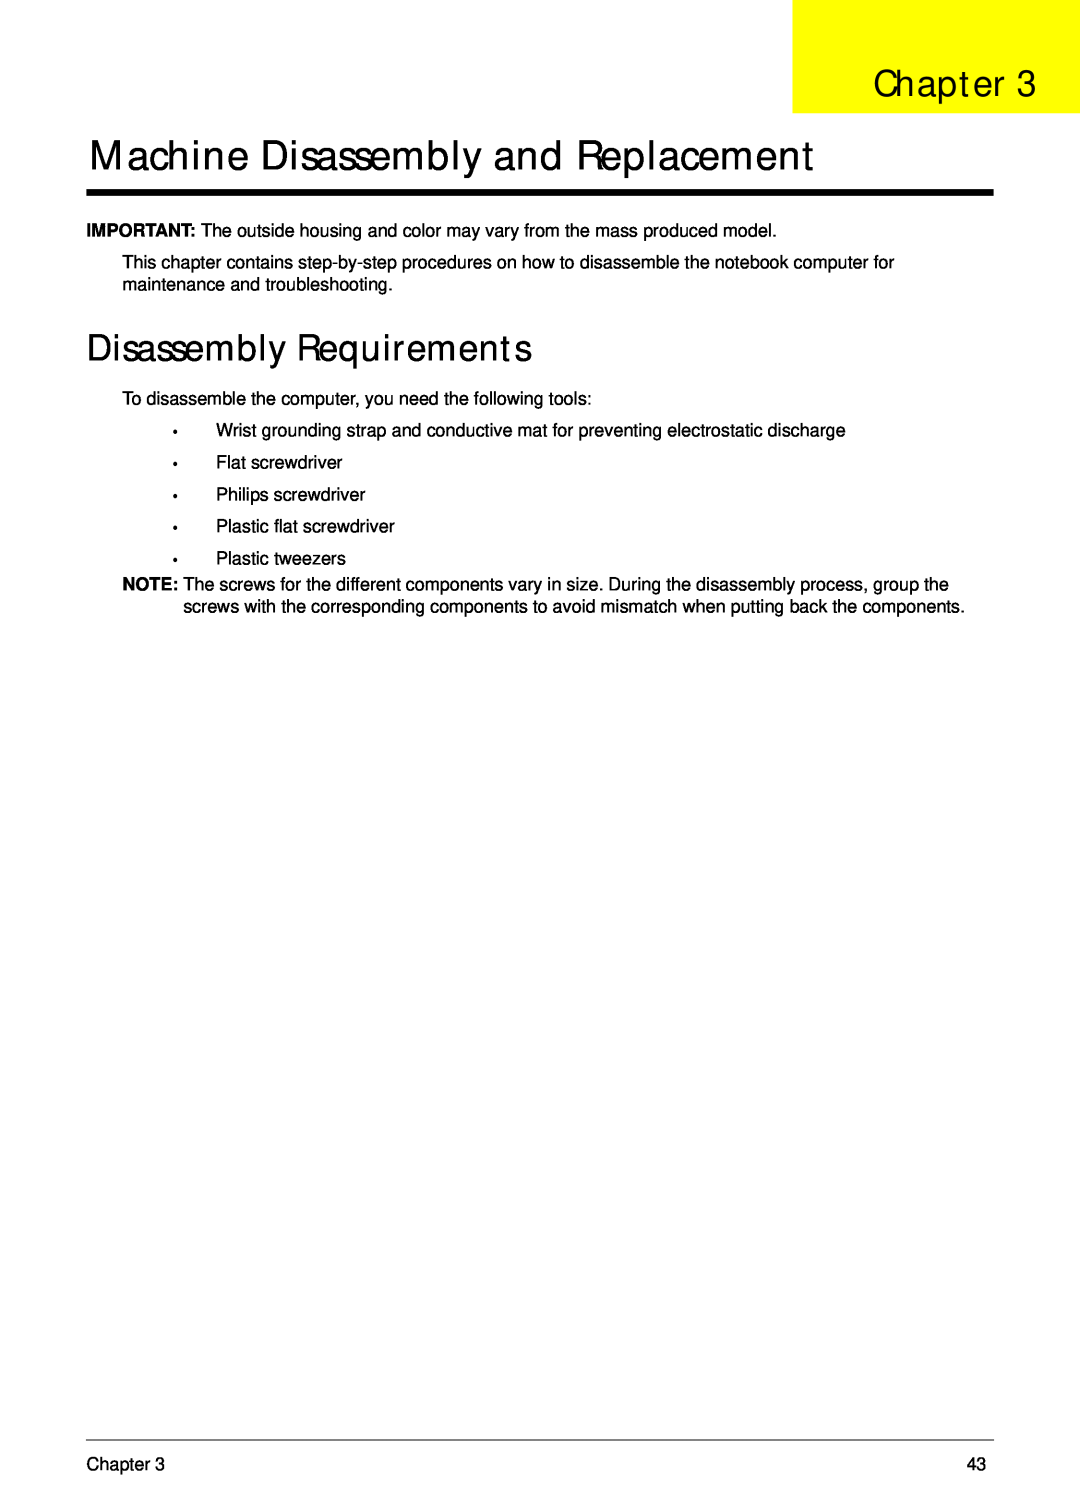 Acer 7315, 7715Z manual Machine Disassembly and Replacement, Disassembly Requirements, Chapter 